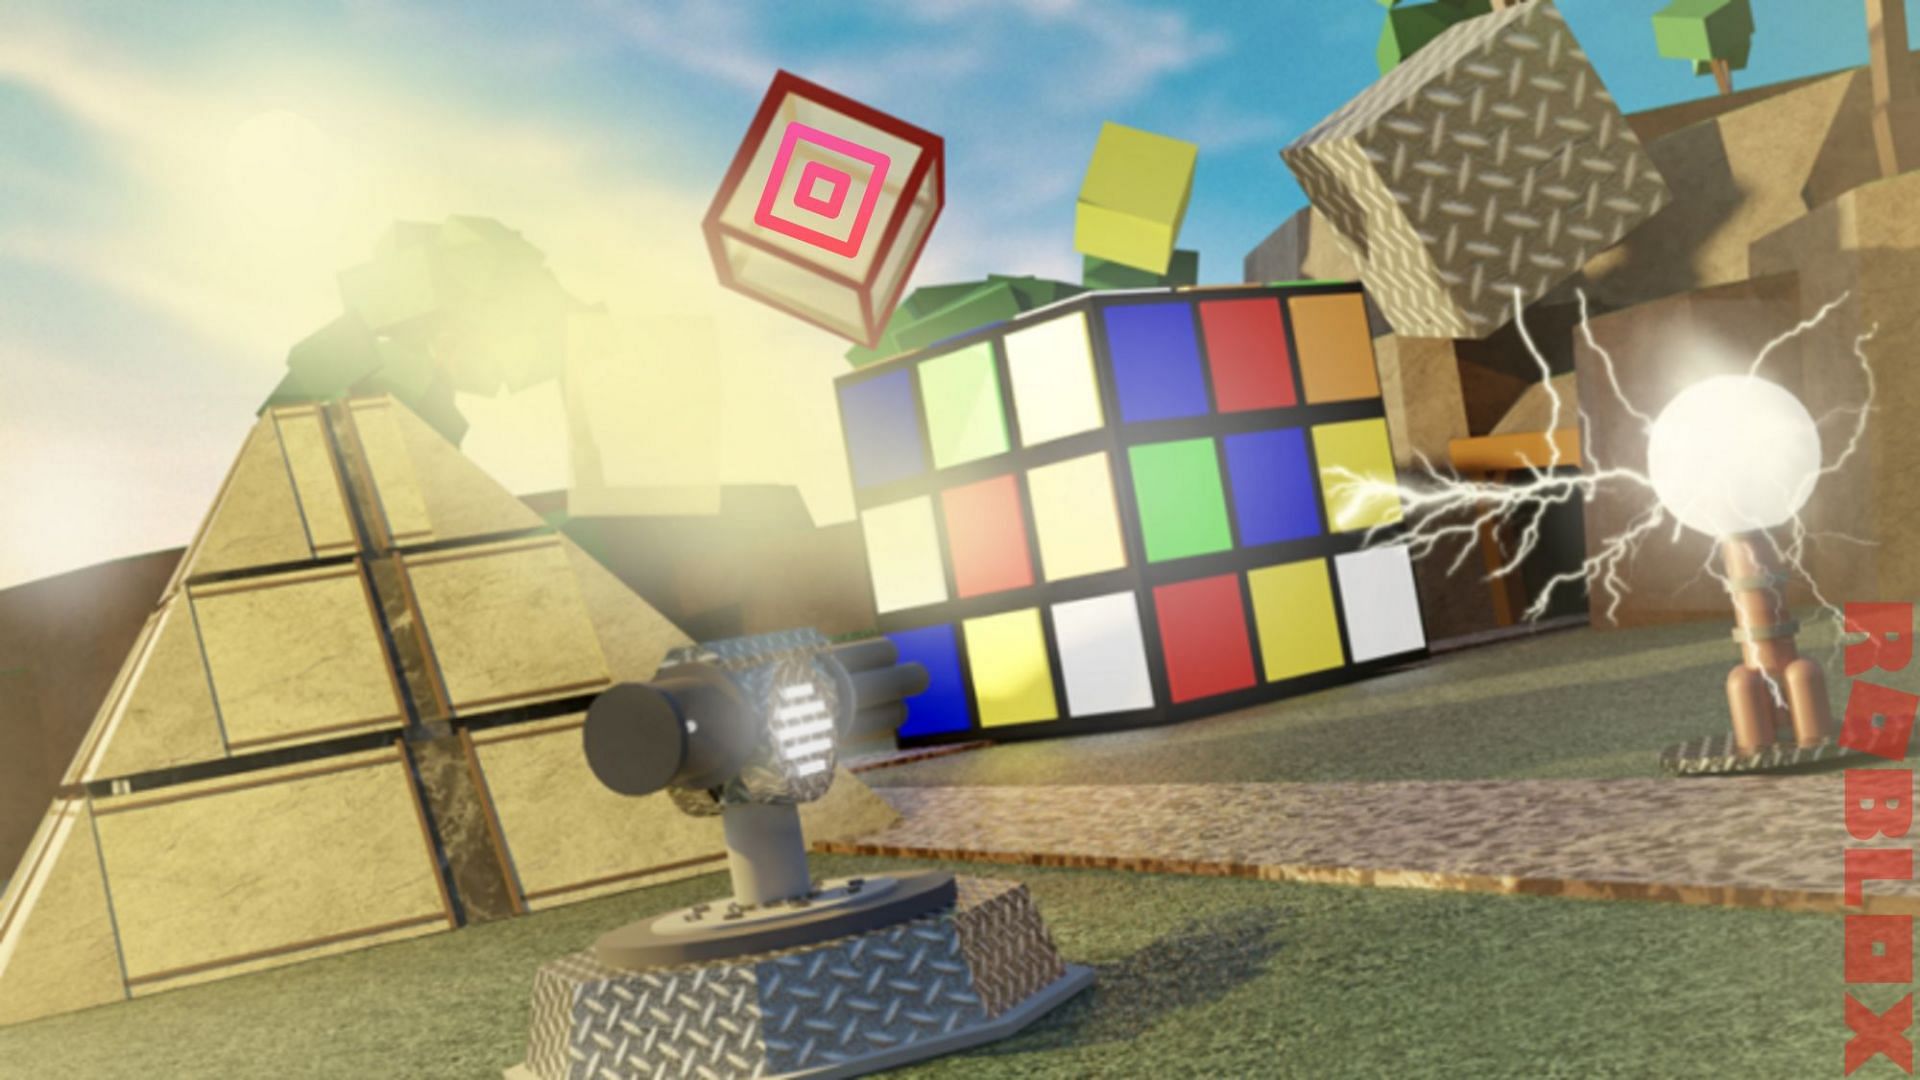 Players can join the Cosmic Development group to earn $100 in Cube Defense (Image via Roblox)